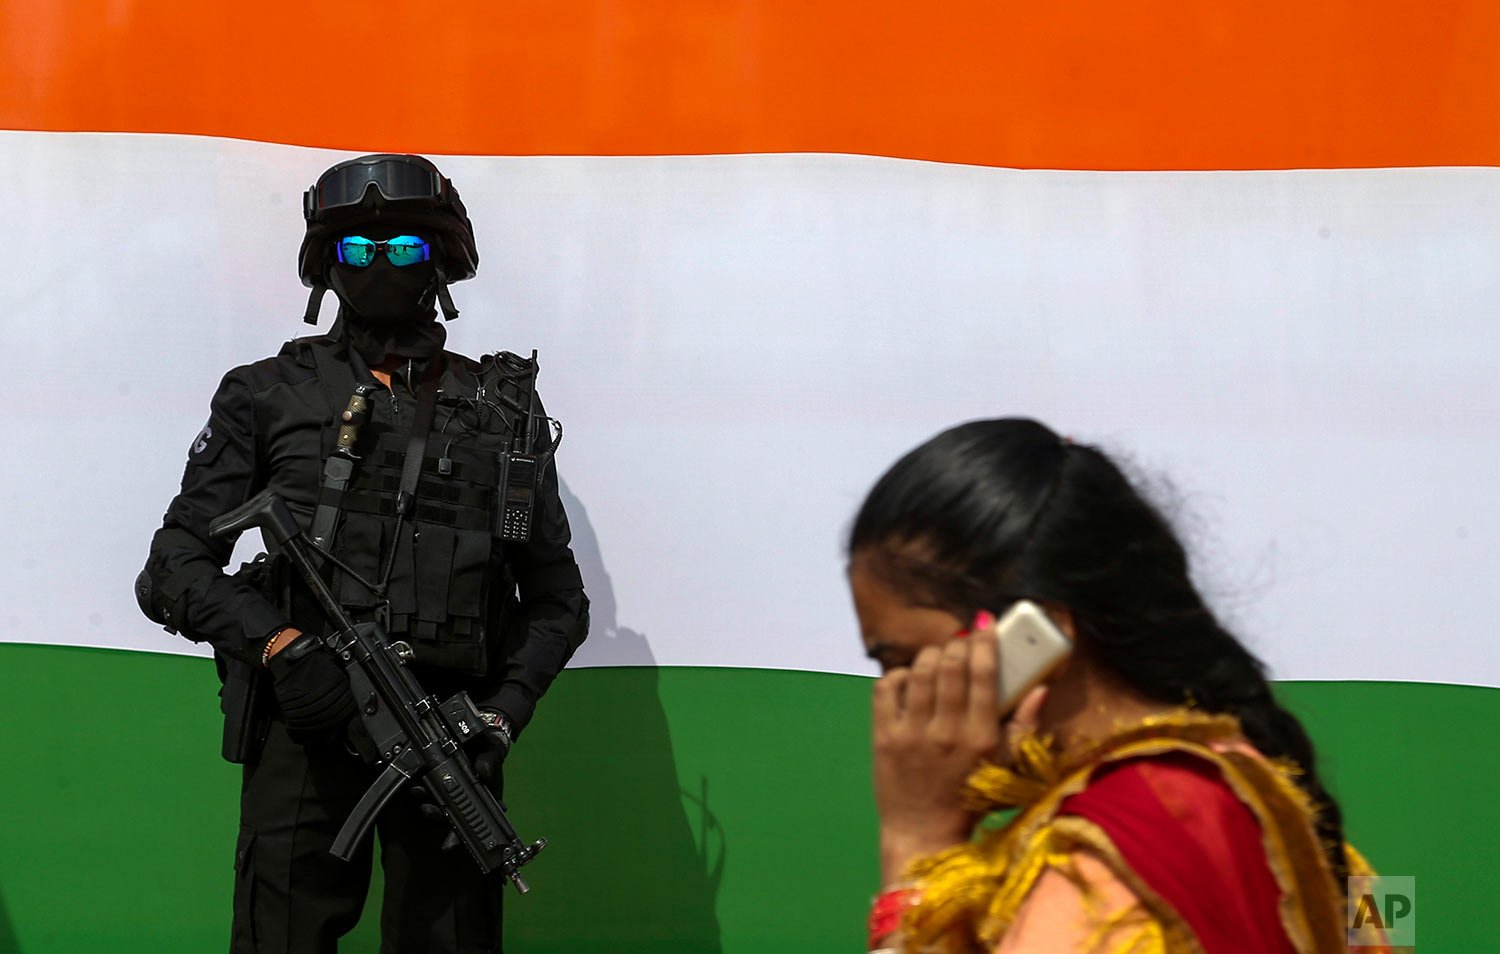  A National Security Guard (NSG) commando stands guard in front of the colors of Indian flag during a car rally of black cats held as part of celebrations marking 75 years of India’s Independence in Hyderabad, India, Sunday, Oct. 17, 2021. (AP Photo/